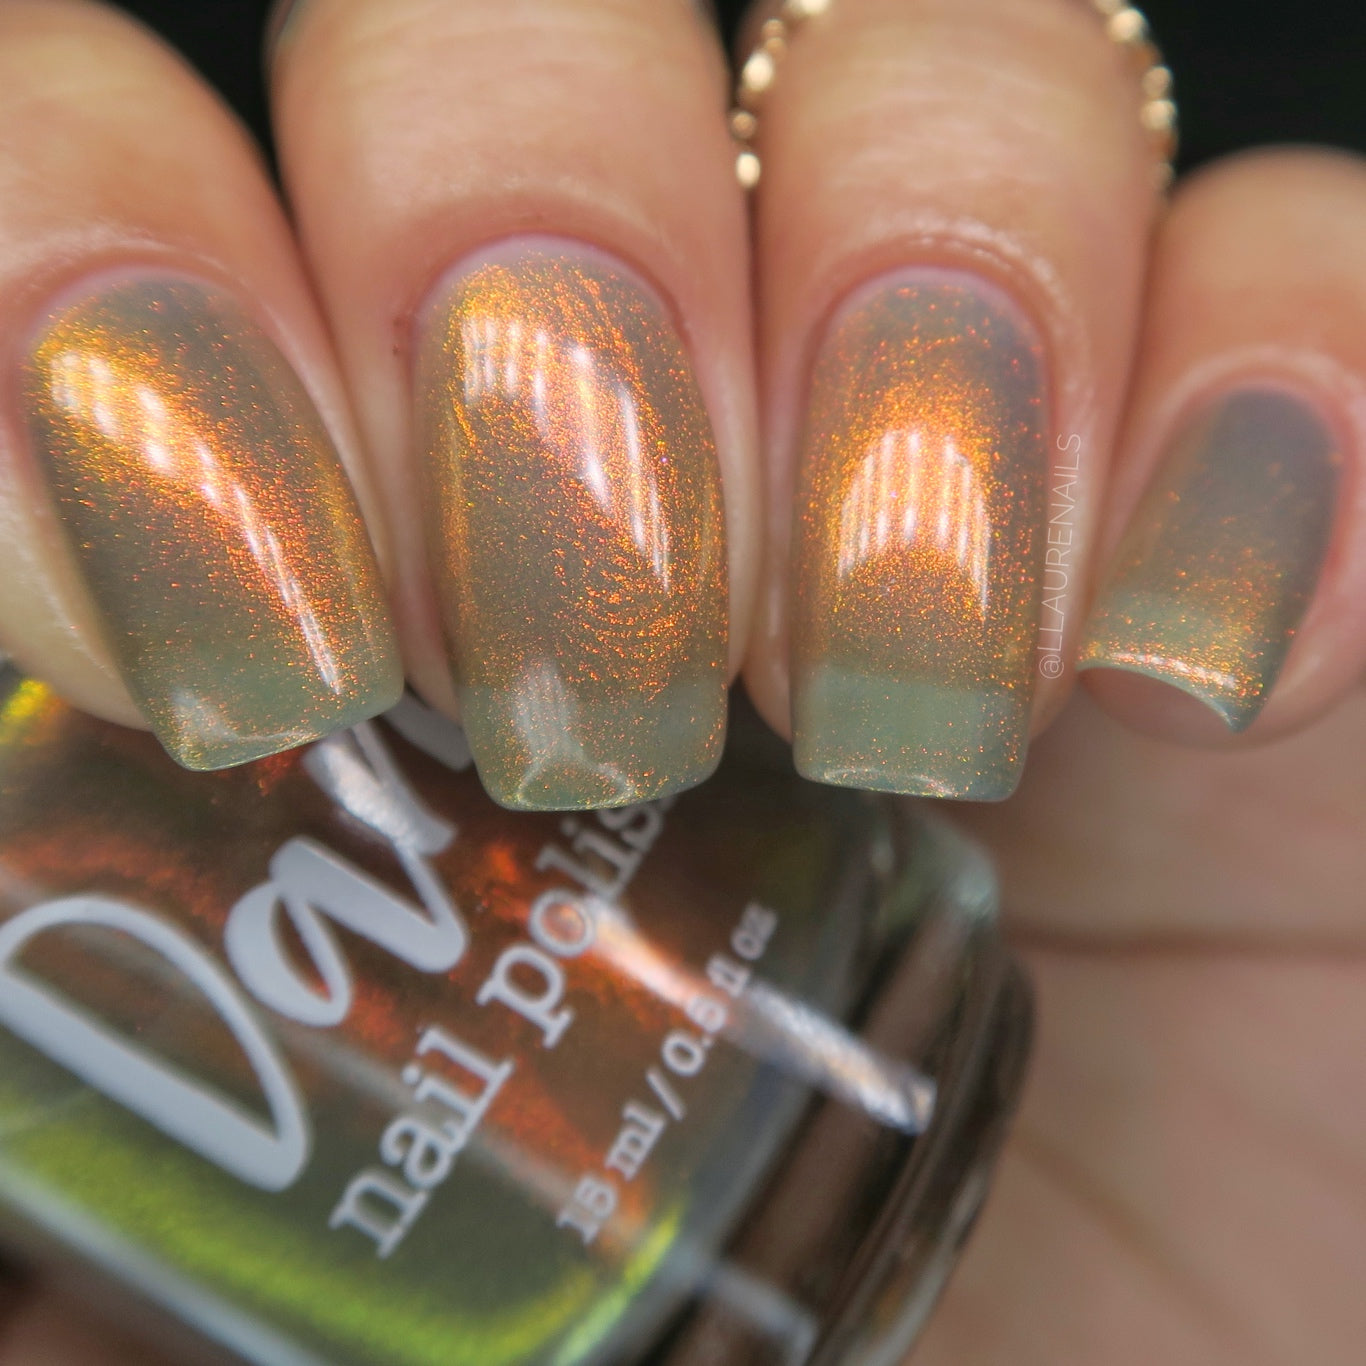 They See BB Rollin’ - Orange Shimmer Nail Polish - Trust the Shimmer Collection